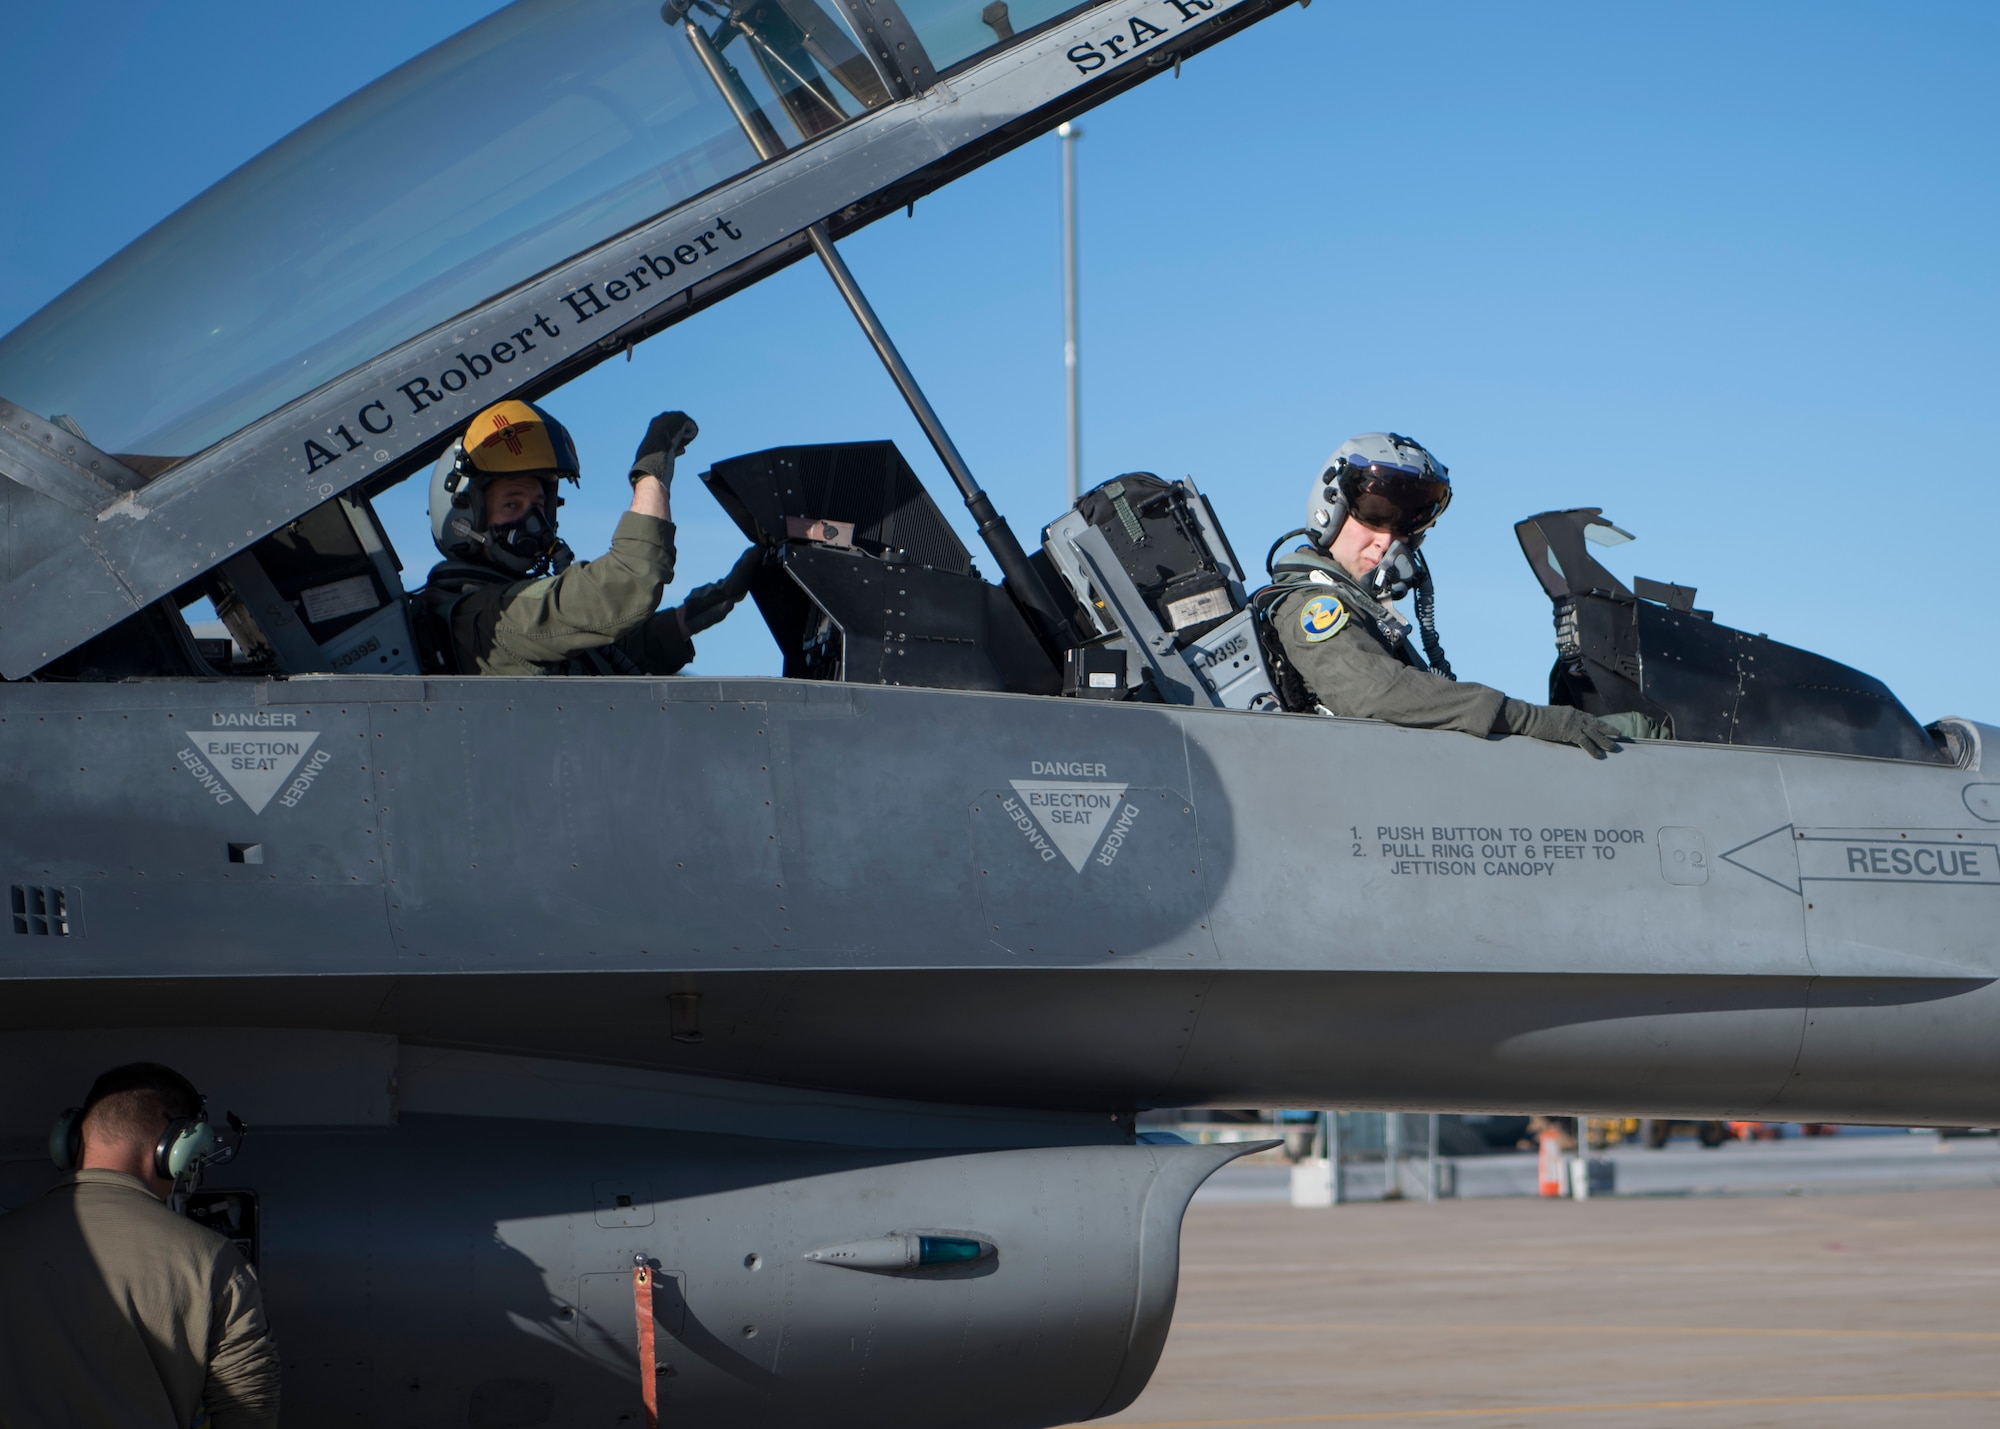 An Airman displays the 311th Fighter Squadron “Fangs Out” symbol before a familiarization flight, April 25, 2019, on Hill Air Force Base, Utah. Forty operations and maintenance personnel were given FAM flights during exercise Venom 19-01. (U.S. Air Force photo by Staff Sgt. BreeAnn Sachs)